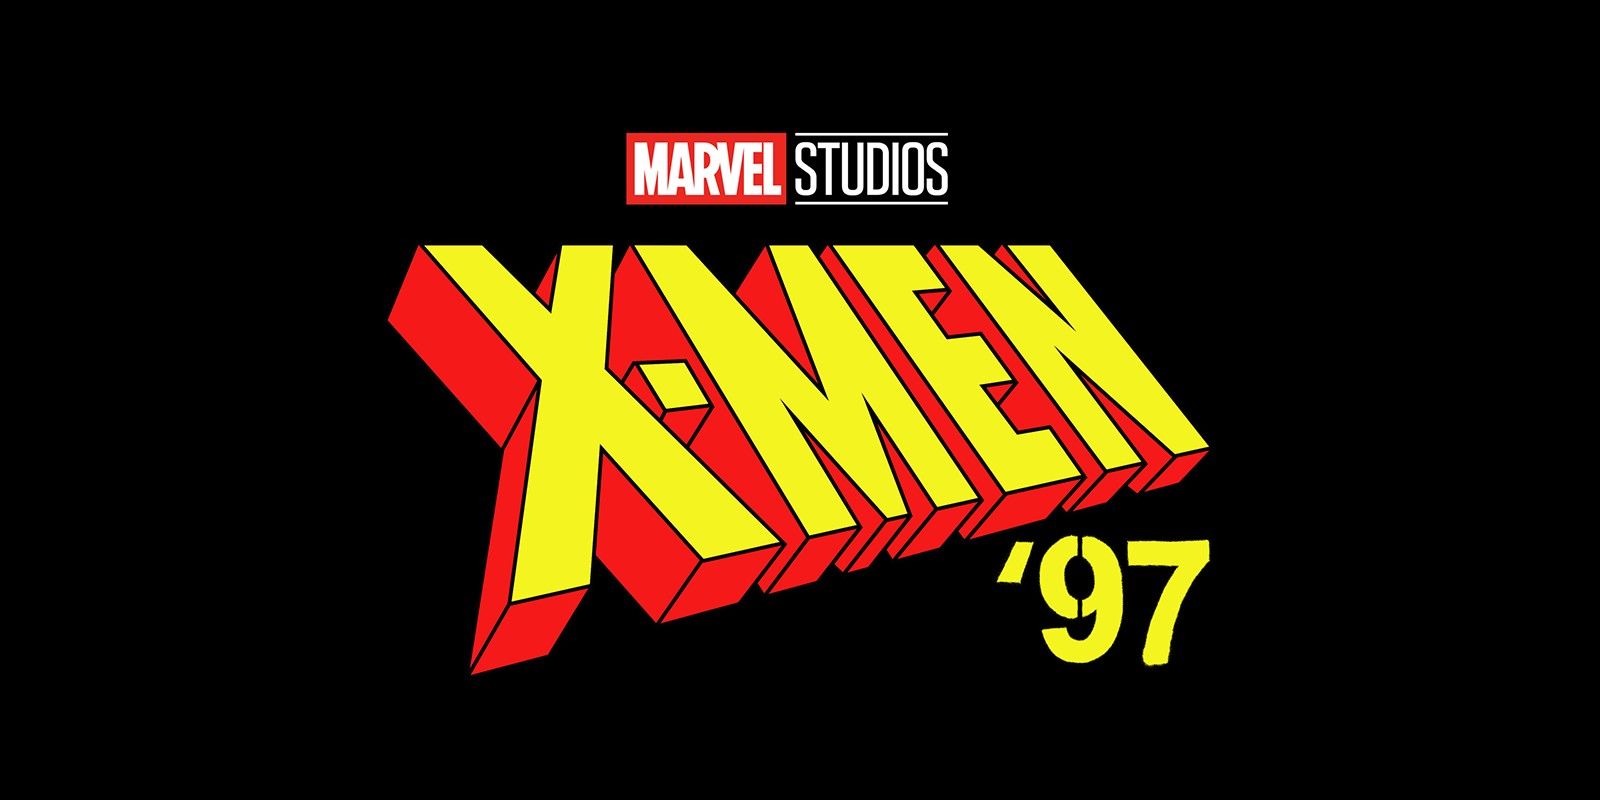 The X-Men '97 logo on a pure black baground.